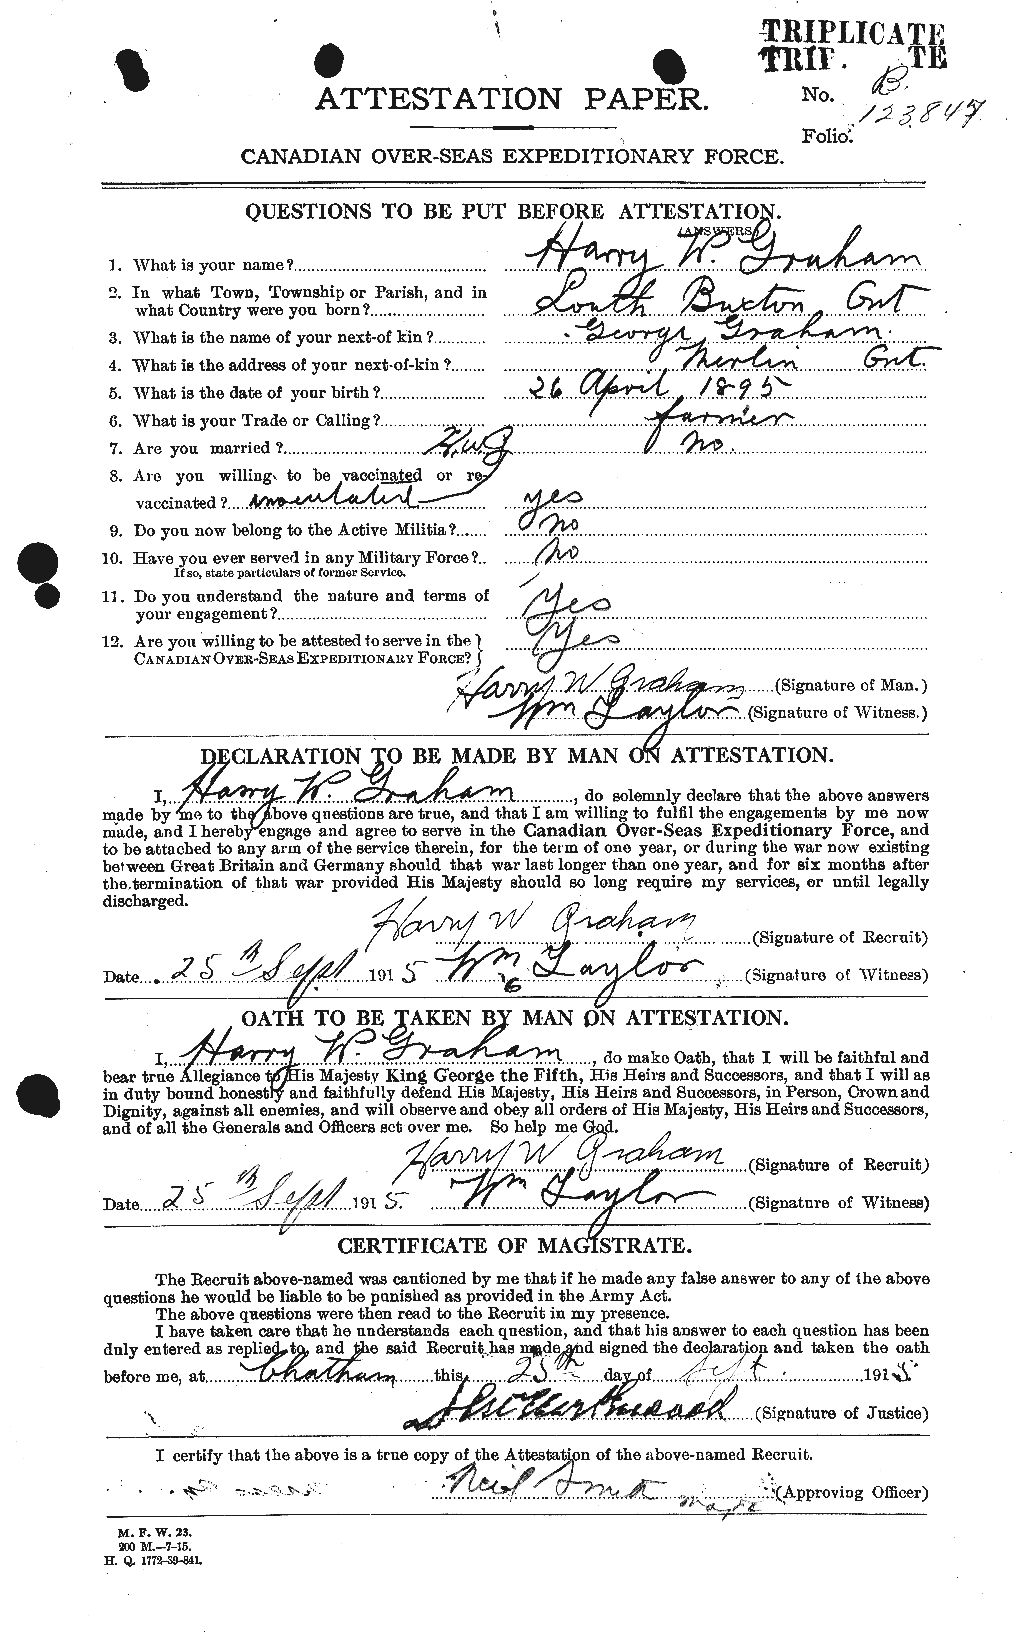 Personnel Records of the First World War - CEF 357725a